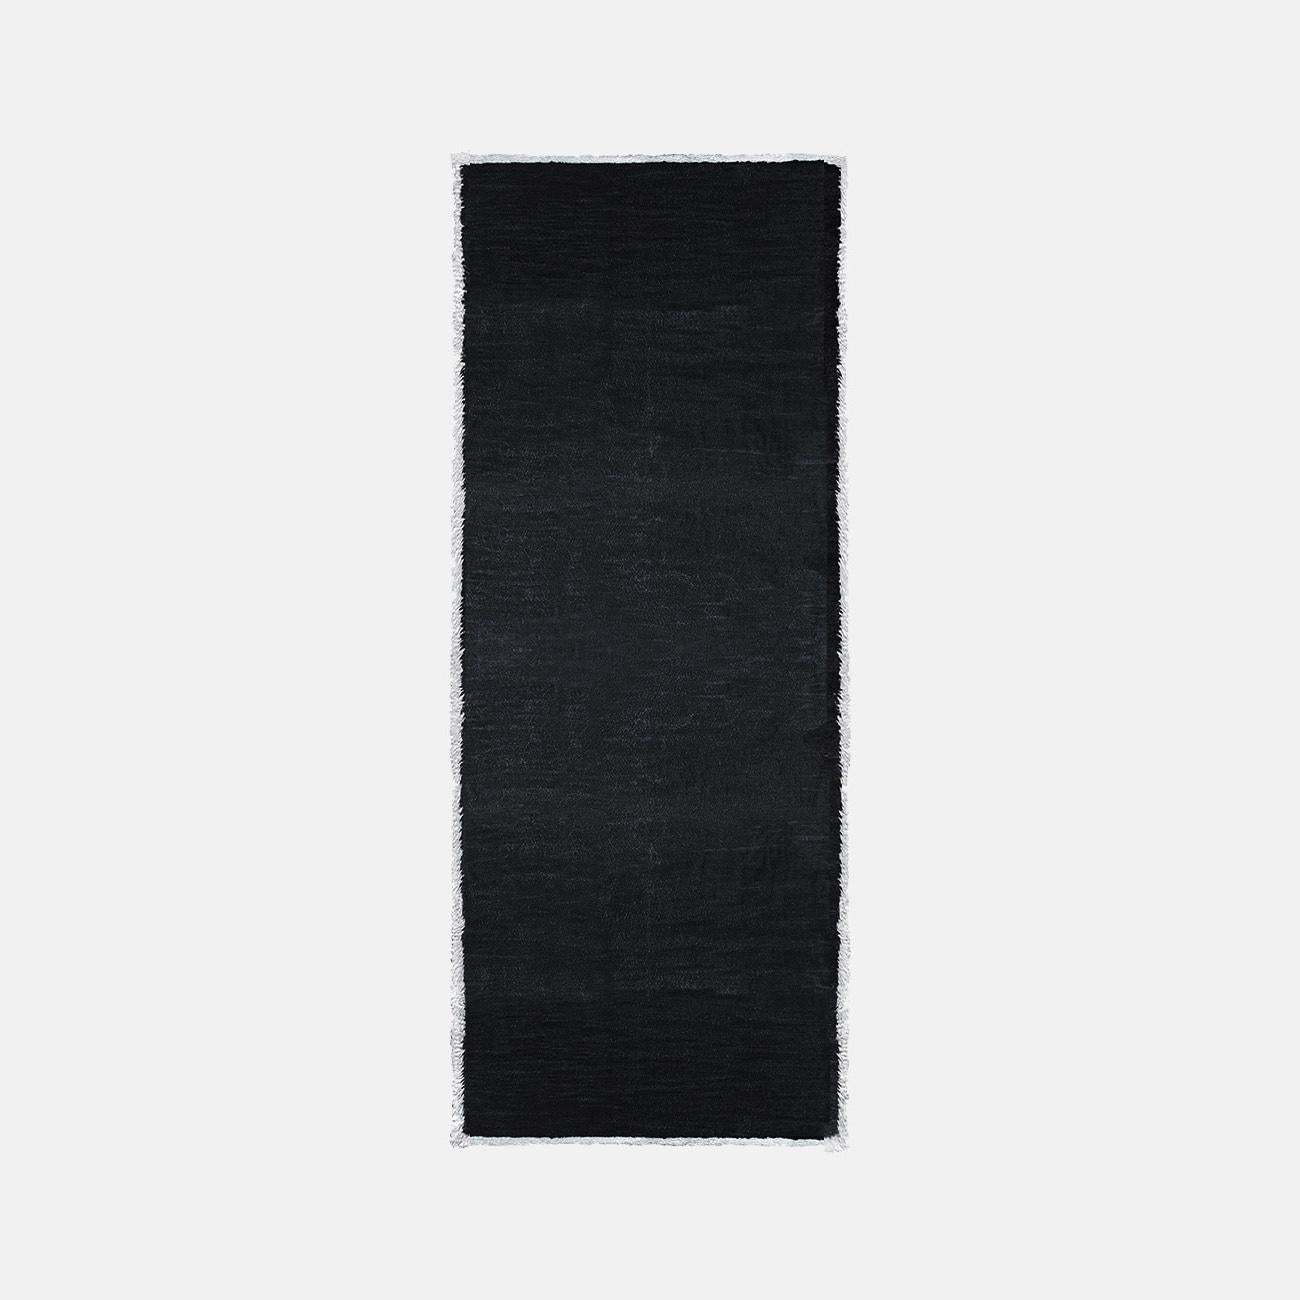 Swedish Kimoto Caru Runner Rug by Atelier Bowy C.D. For Sale